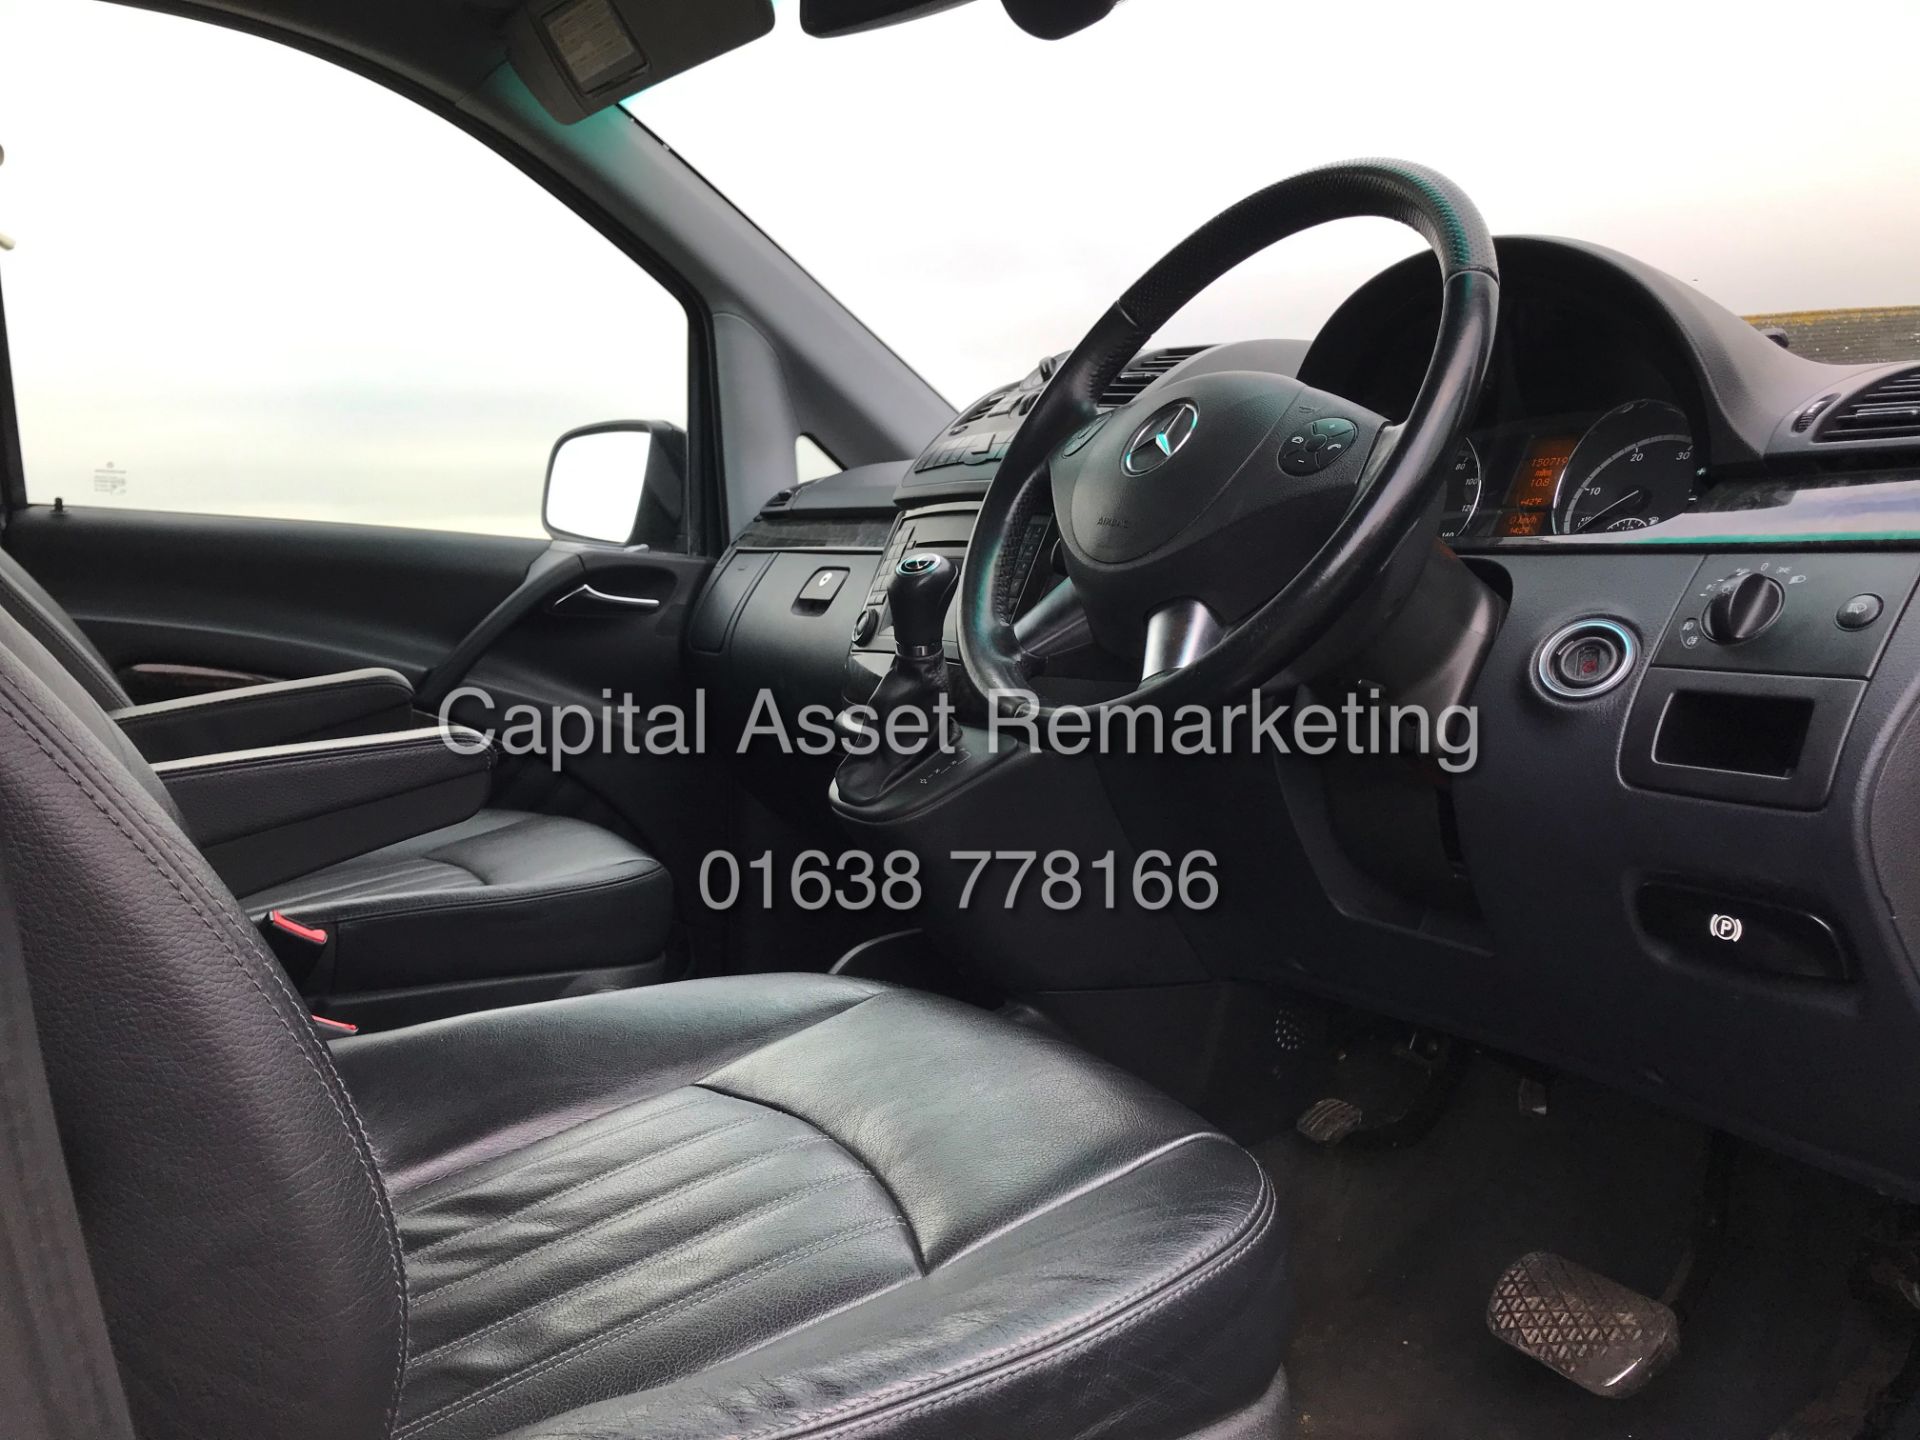 (ON SALE) MERCEDES VIANO 2.2CDI "AMBIENET" XLWB 8 SEATER (14 REG) 1 OWNER - FULLY LOADED - LEATHER - Image 10 of 28